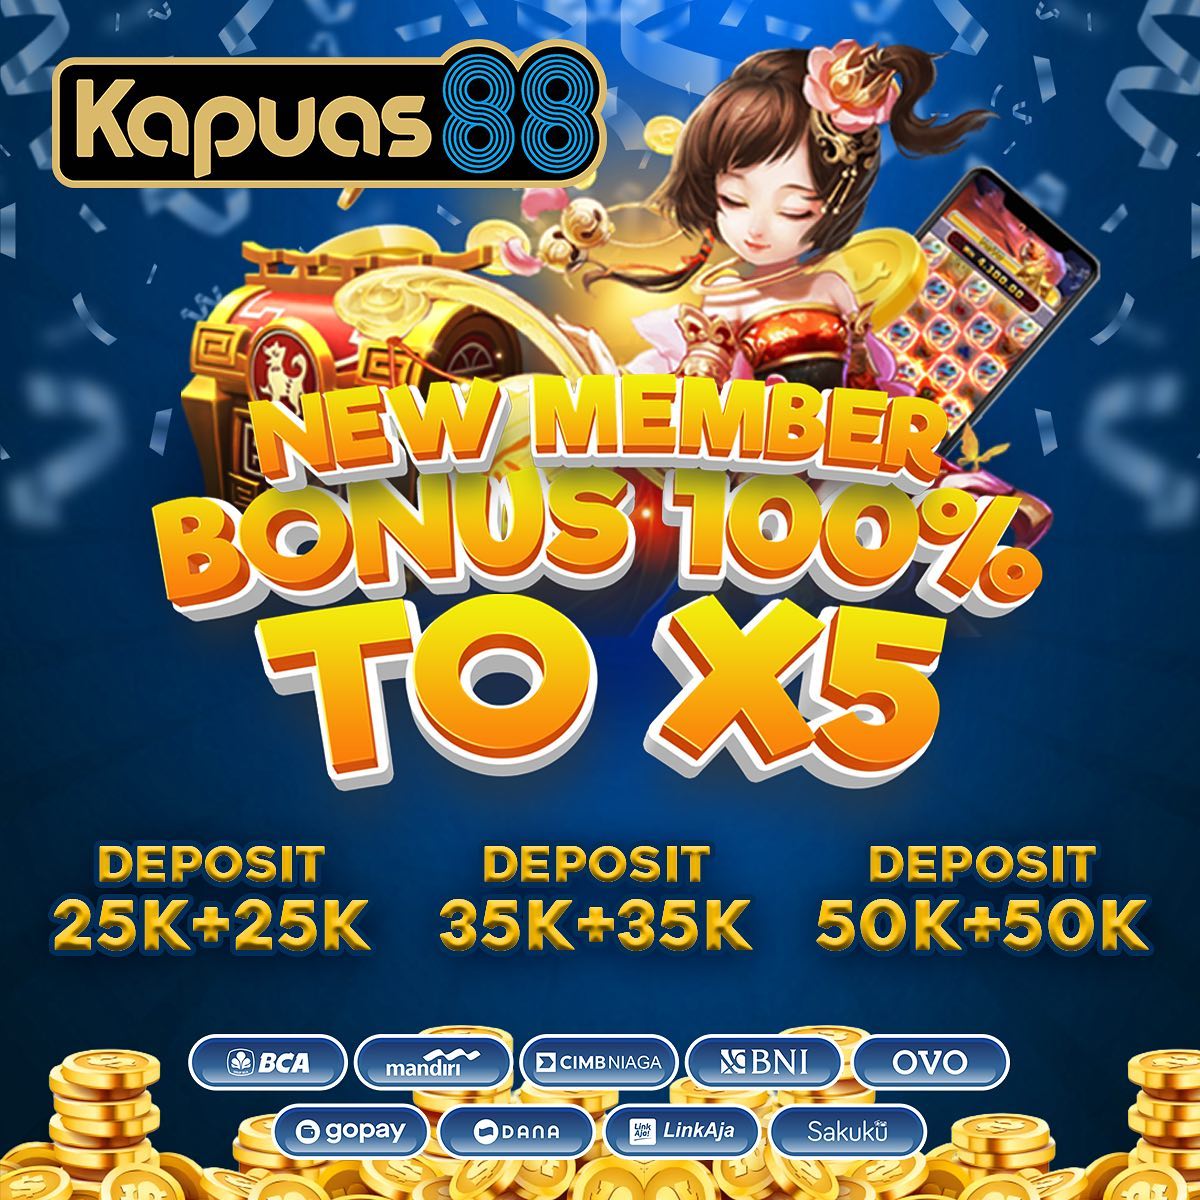 Kapuas88: A Gateway to Online Entertainment and Gaming